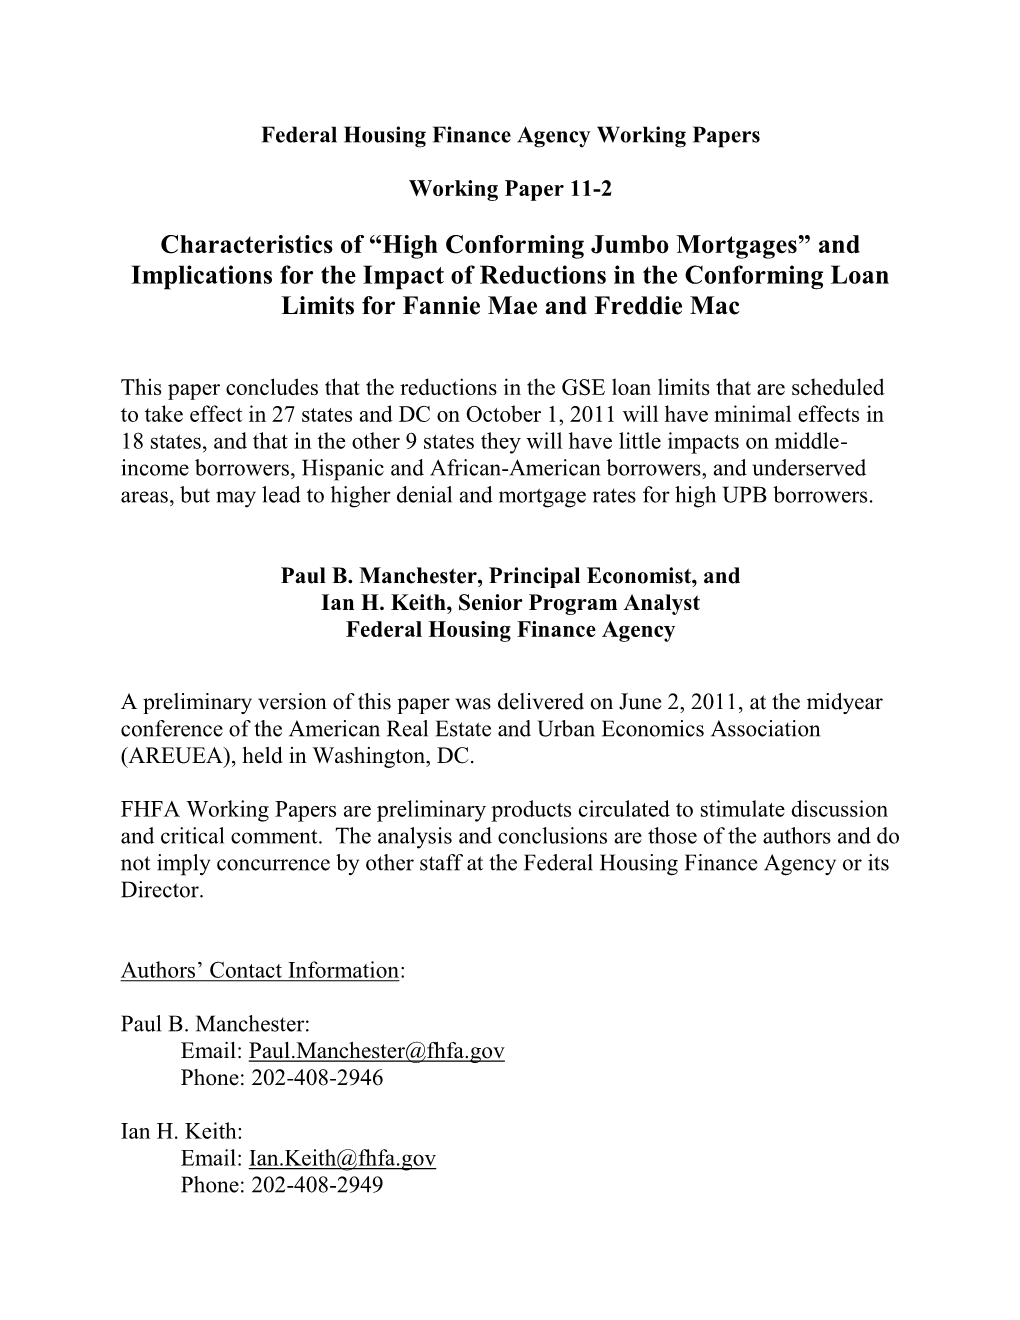 FHFA Working Paper 11-2: Characteristics of “High Conforming Jumbo Mortgages”